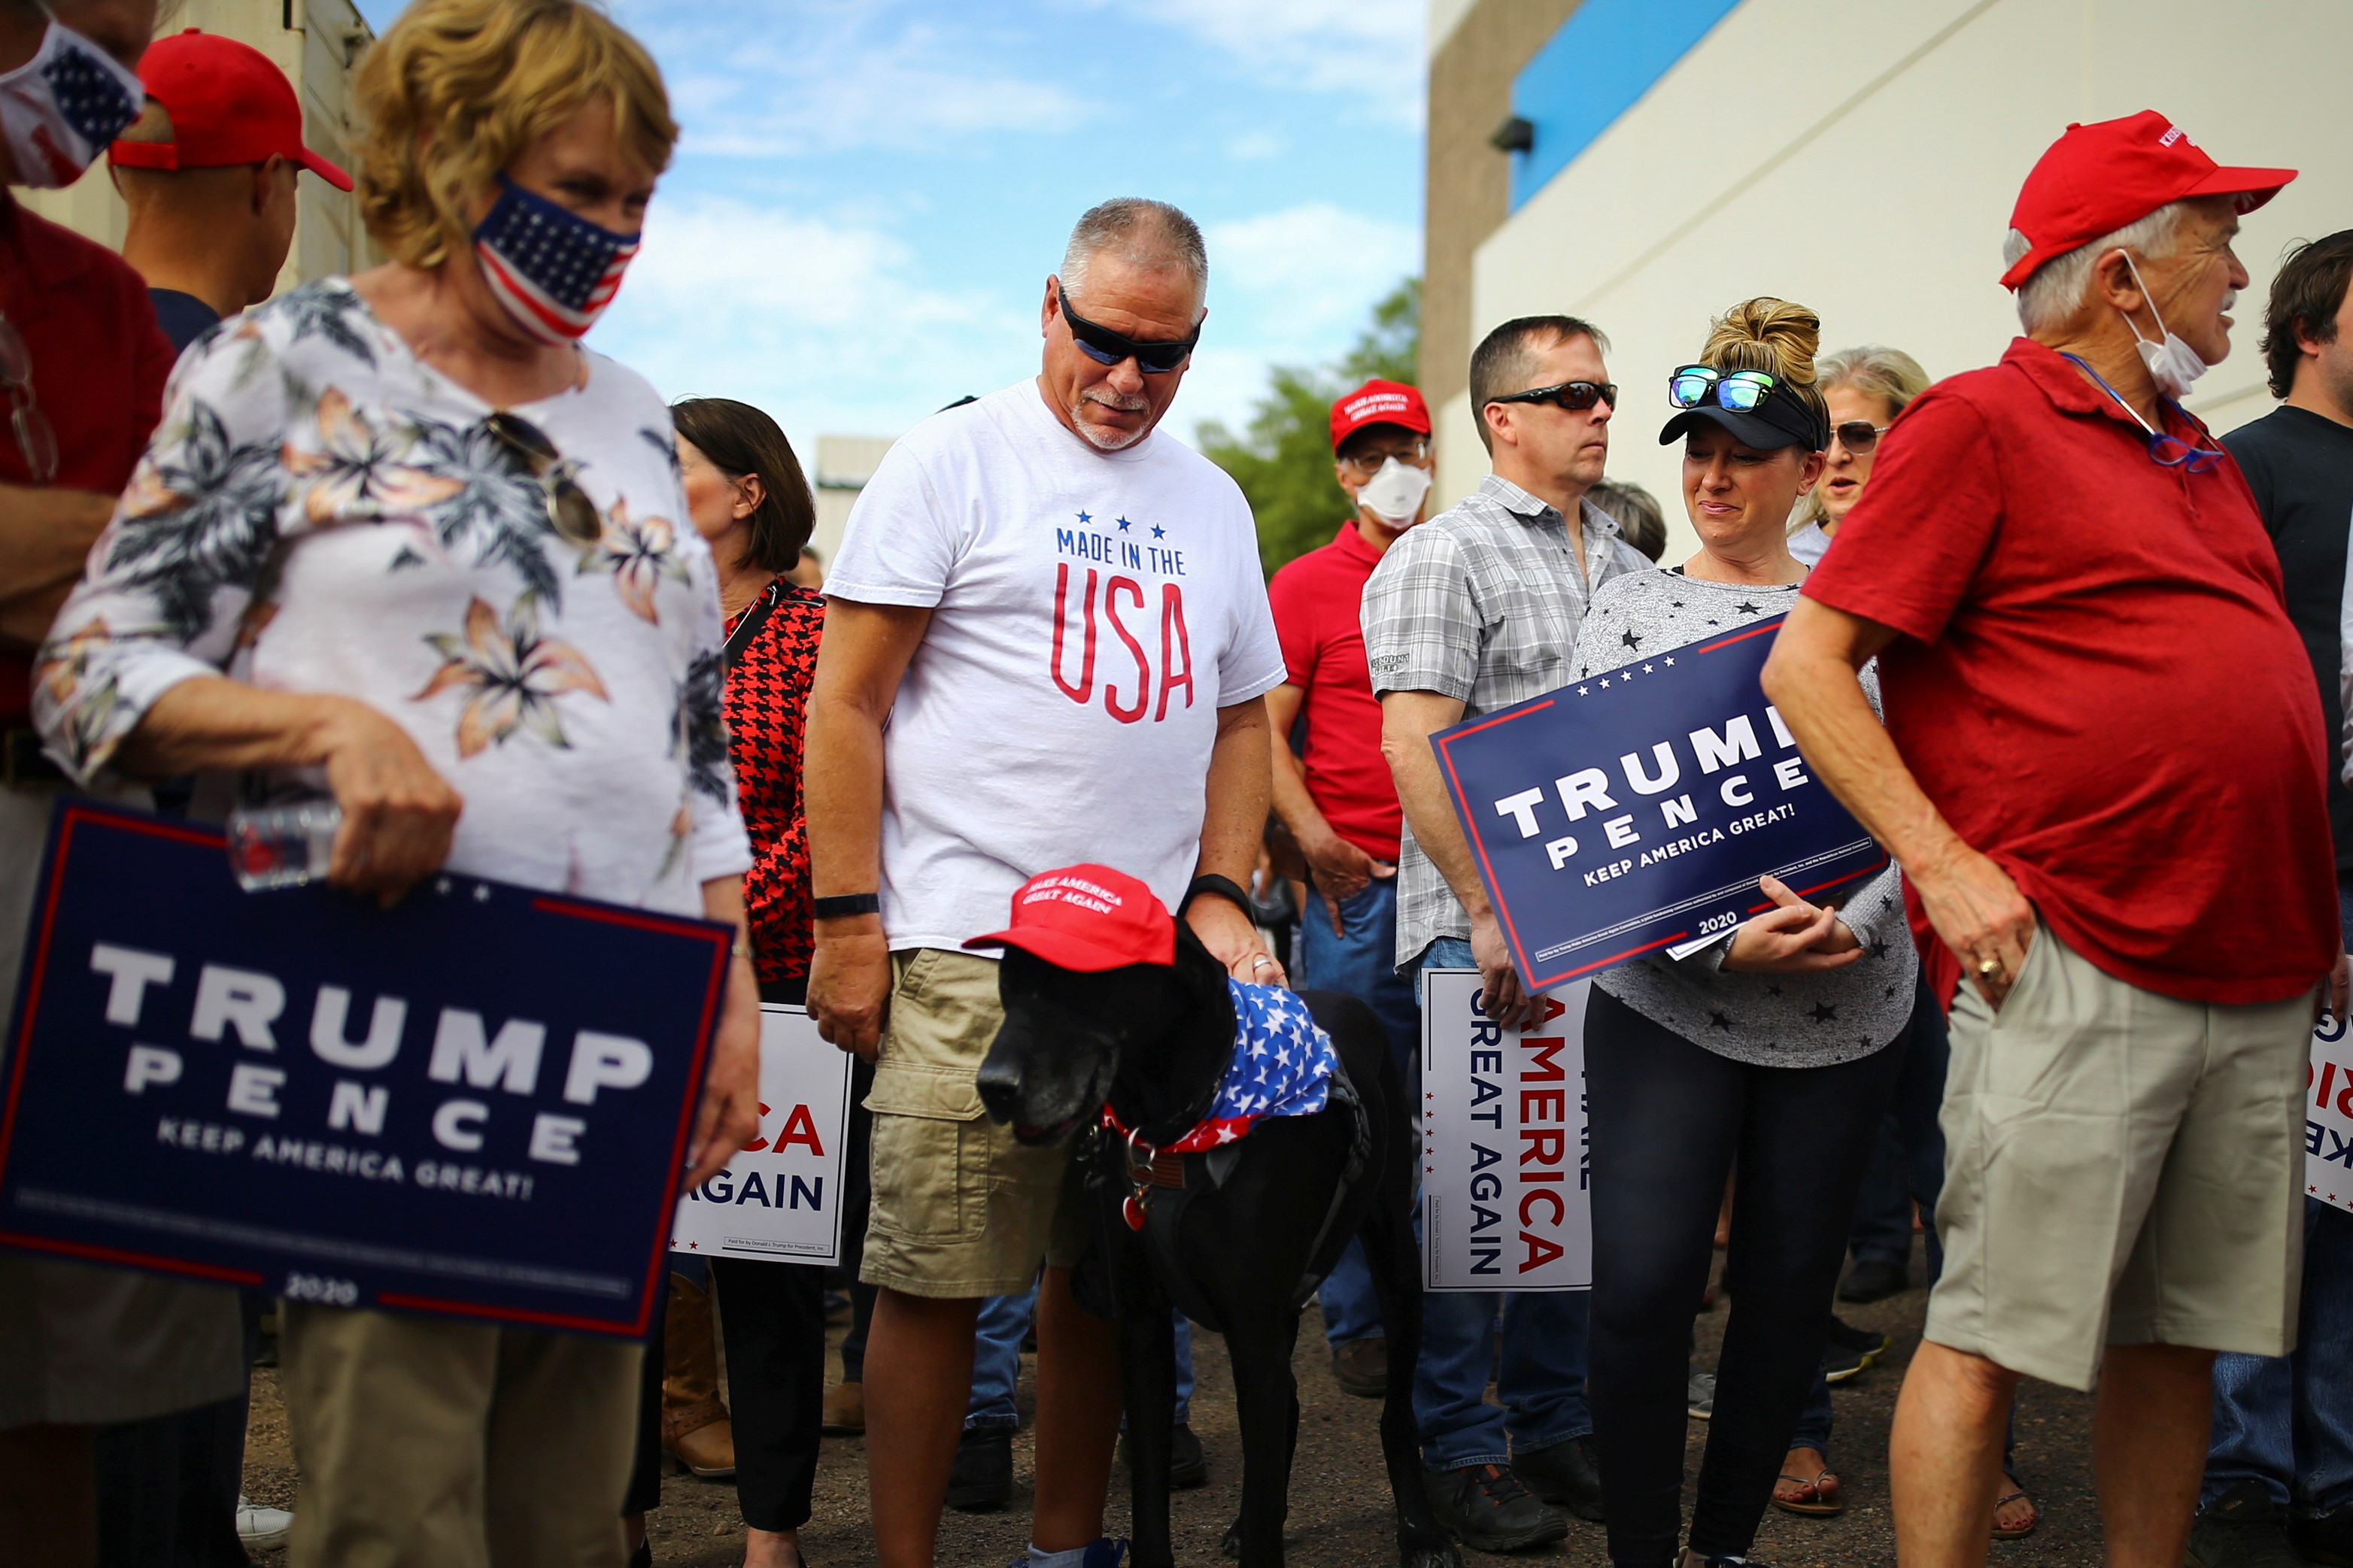 Supporters arrive to take part in a campaign rally from Donald Trump Jr for U.S. President Donald Trump ahead of Election Day in Scottsdale, Arizona, U.S., November 2, 2020